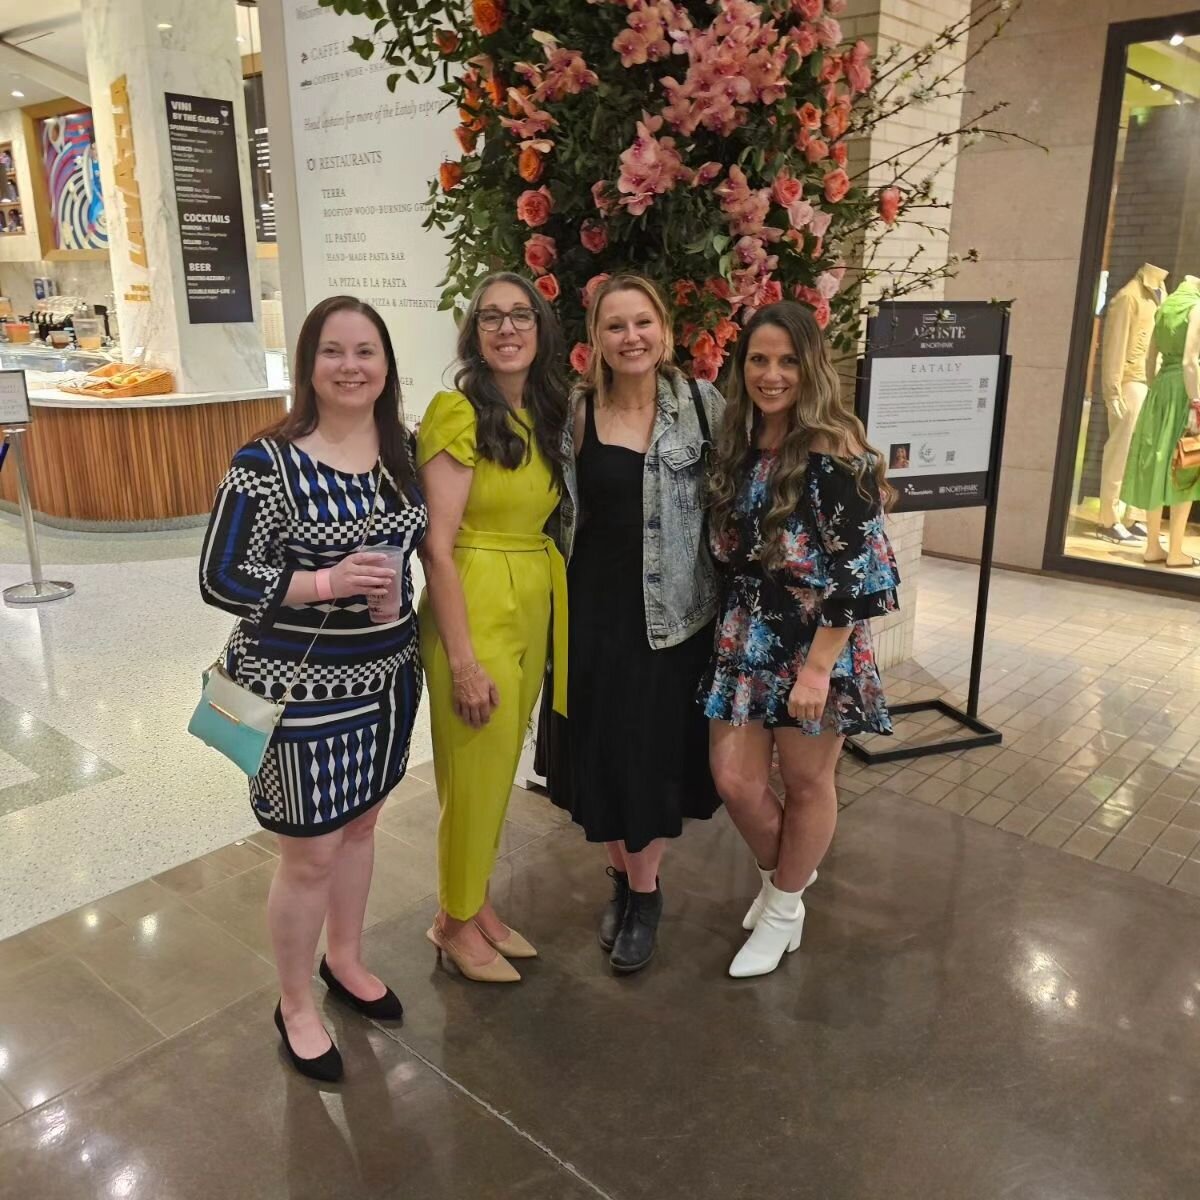 I had an amazing night with the team from FleuraMetz at the Fleurs de Villes Artiste reception.  This was the first time this world-renowned floral exhibition was held in Texas and it was amazing ❤️👏🌷

@fleurametzdallas
@fleursdevilles